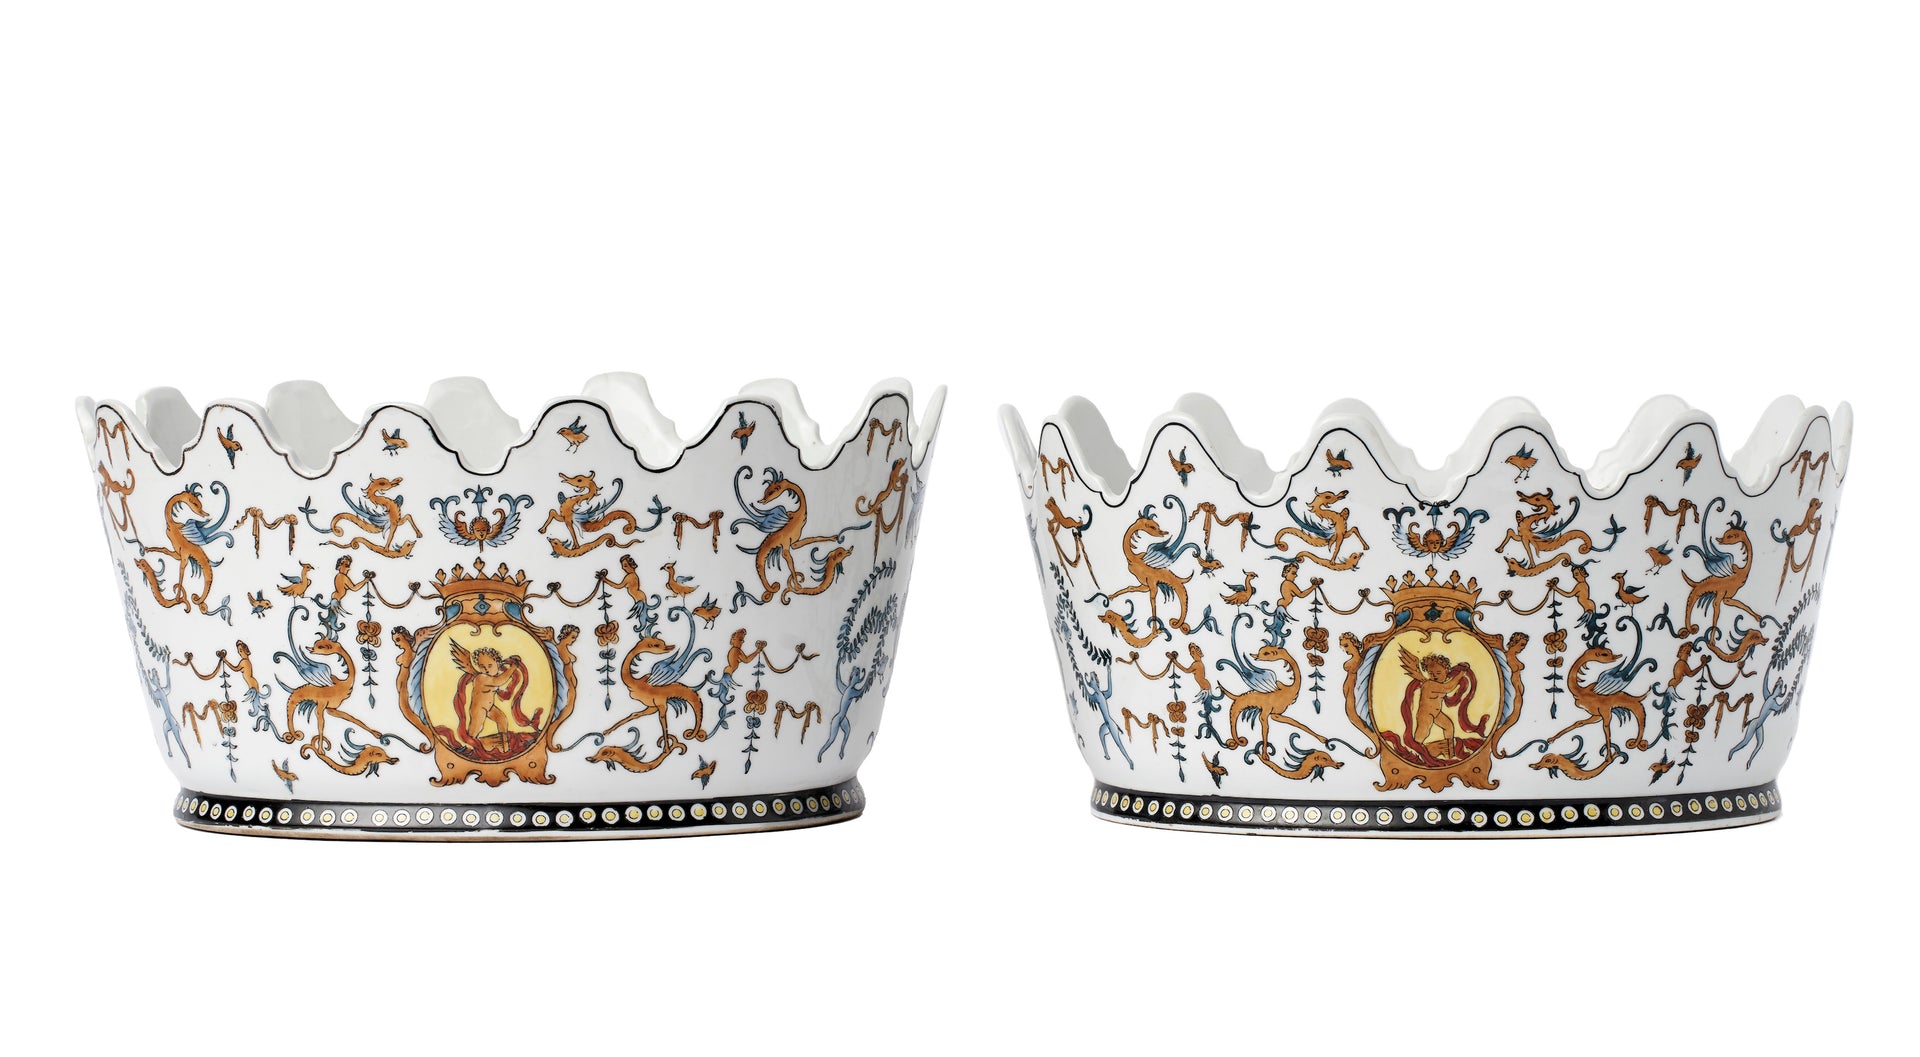 SOLD A very decorative pair of oval porcelain jardinieres, French Circa 1940